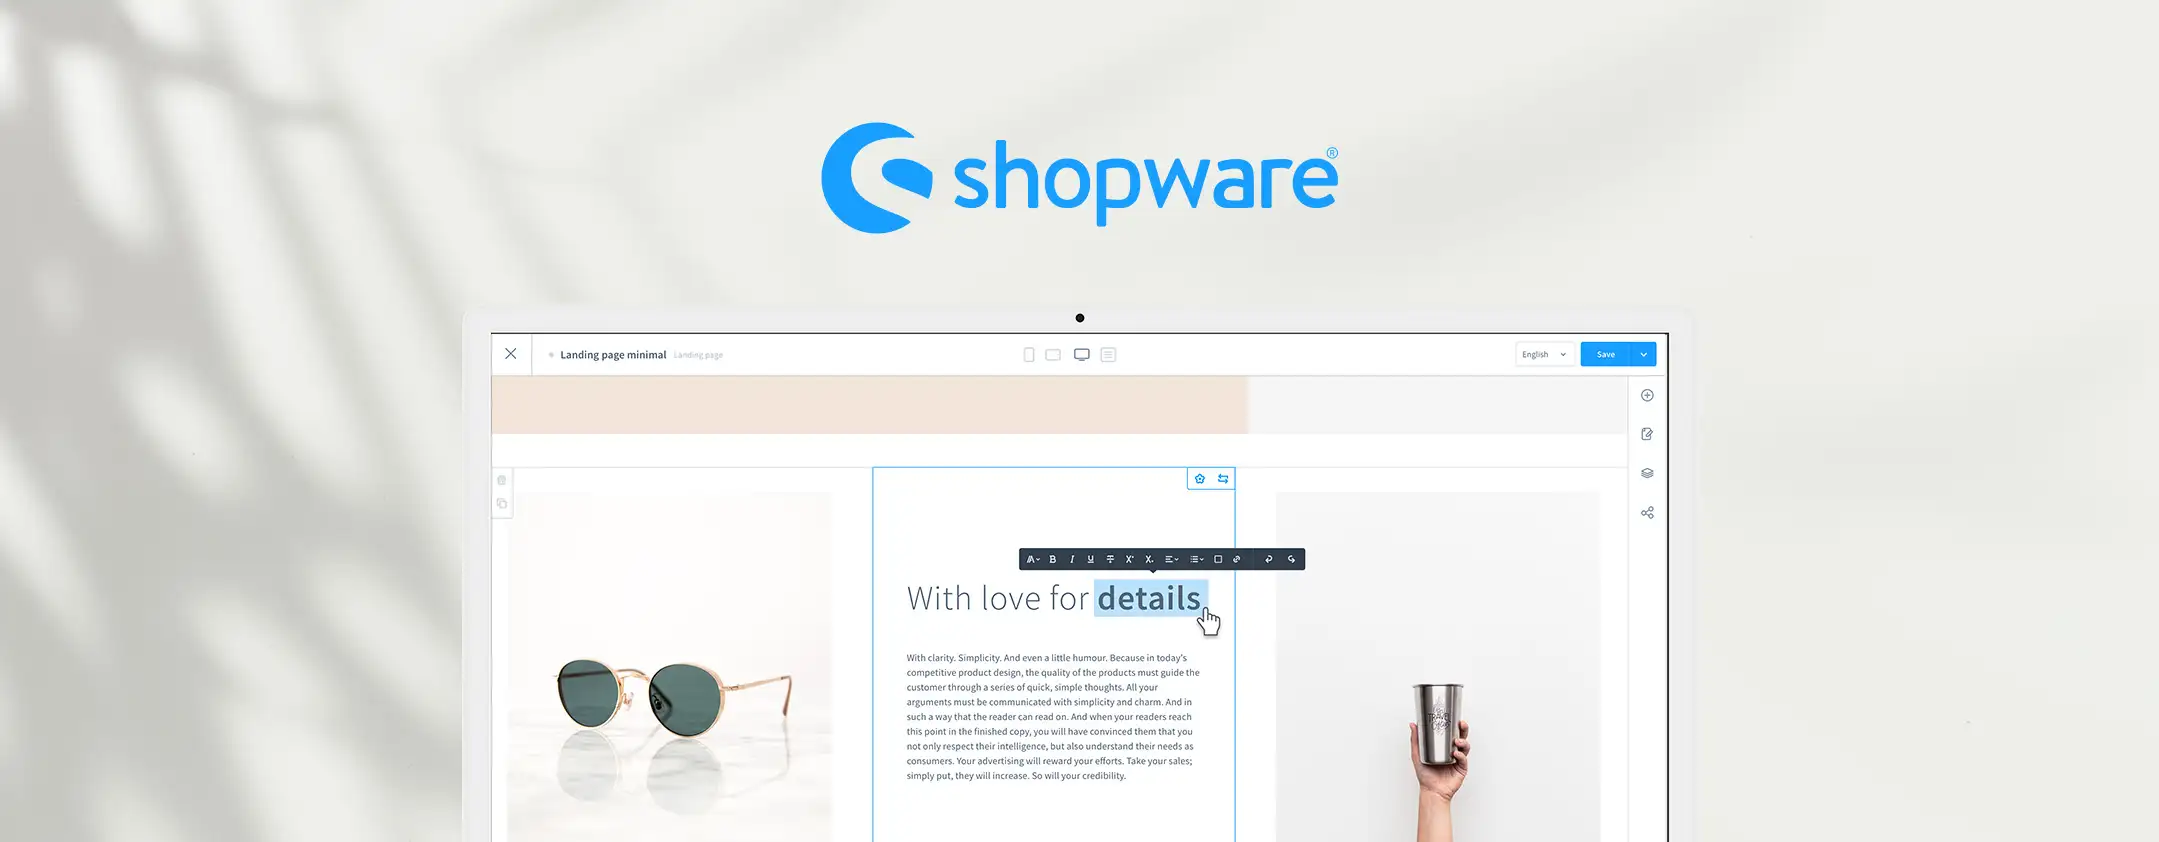 Shopware - With love for details